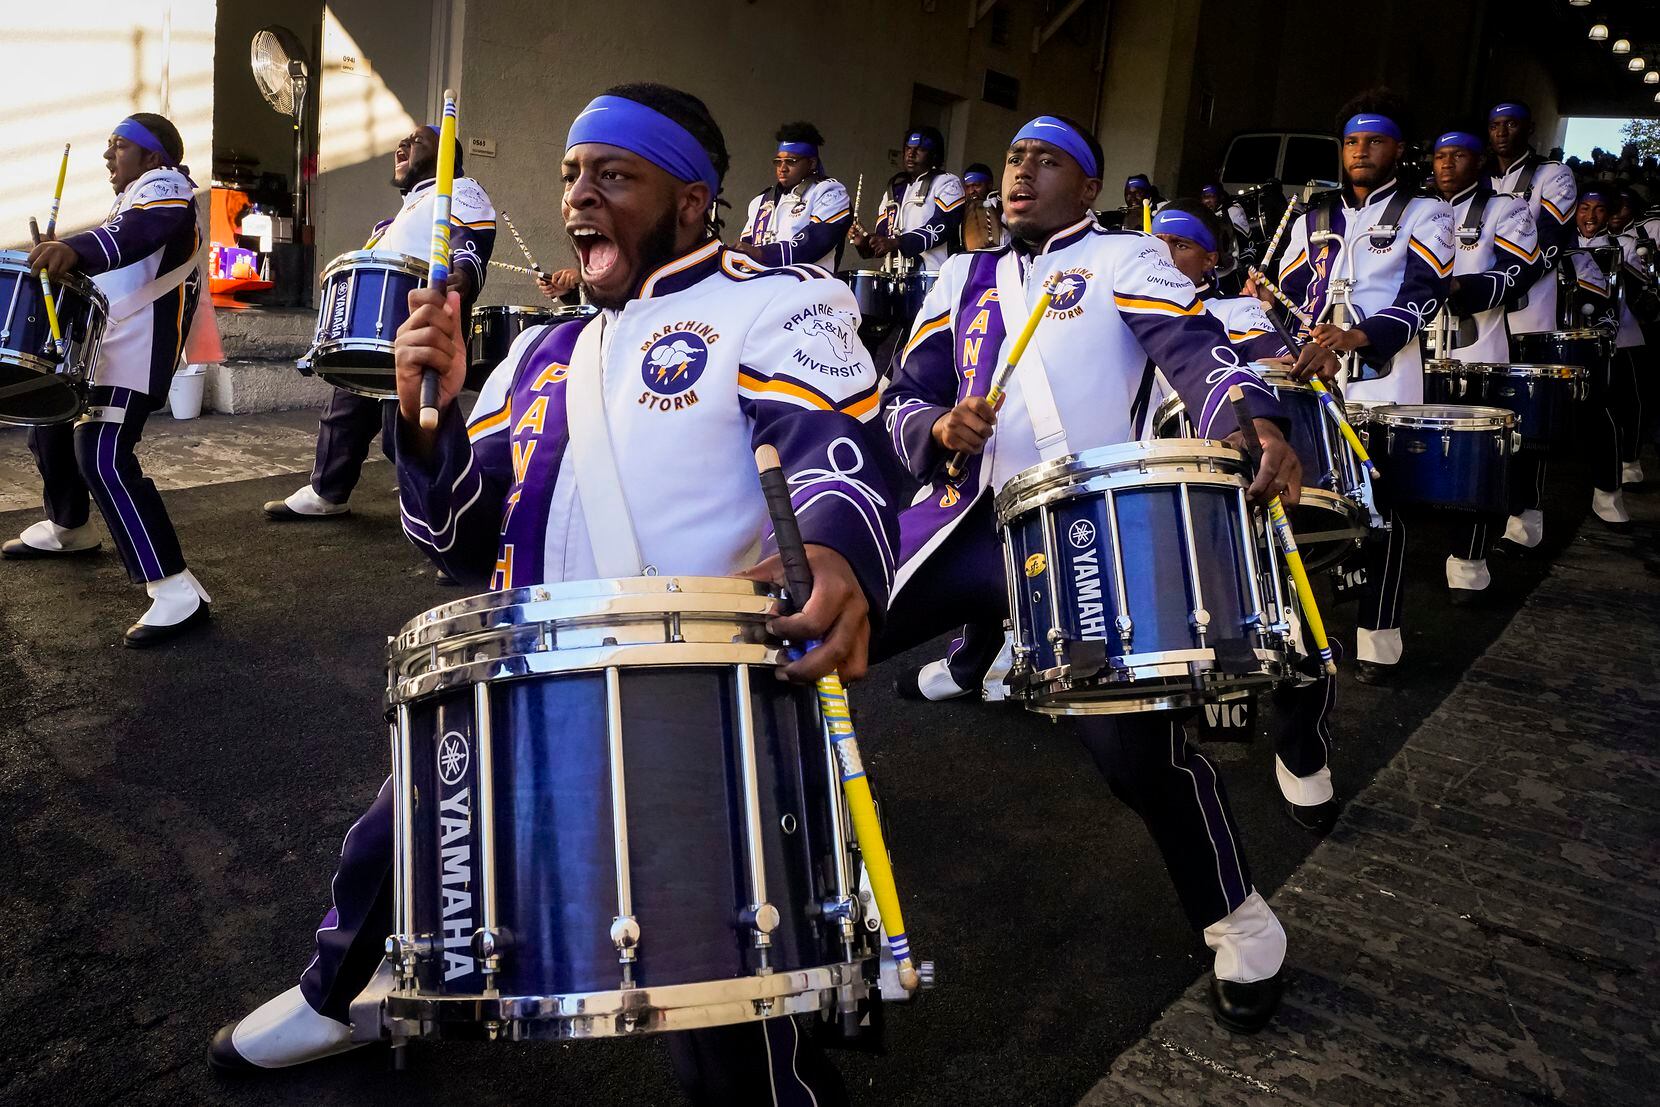 Members of the Prairie View Marching Storm band enter the stadium before the State Fair...